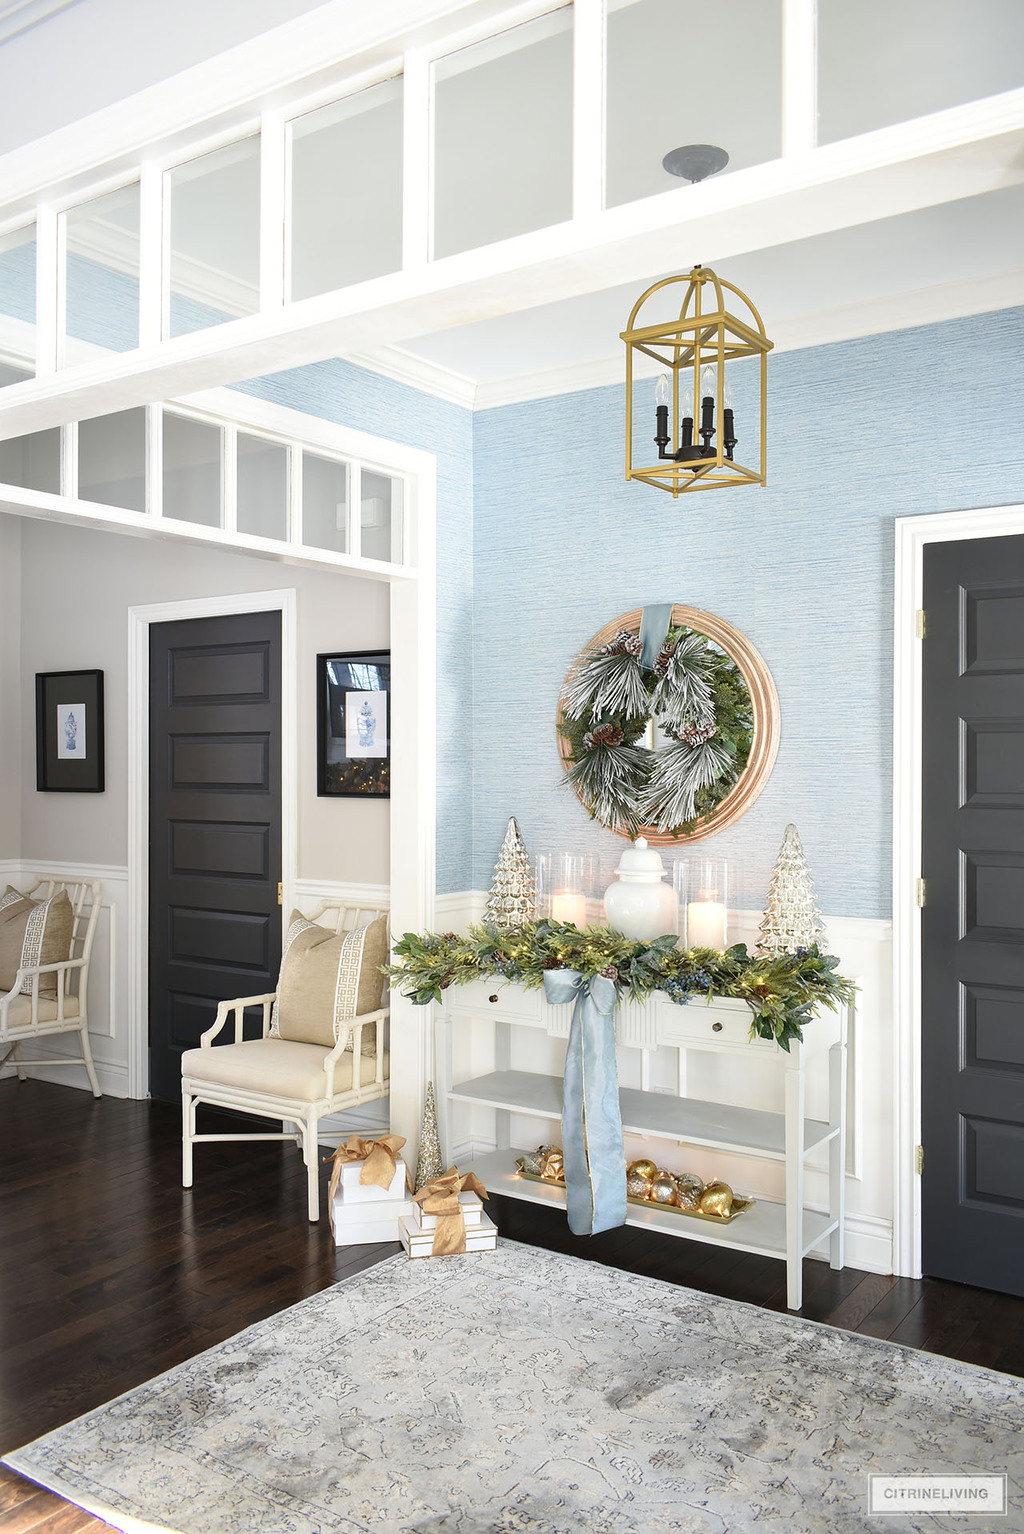 Entryway decorated for Christmas with green garland and wreath, mercury glass trees and silver and gold ornaments, accented with blue ribbon.